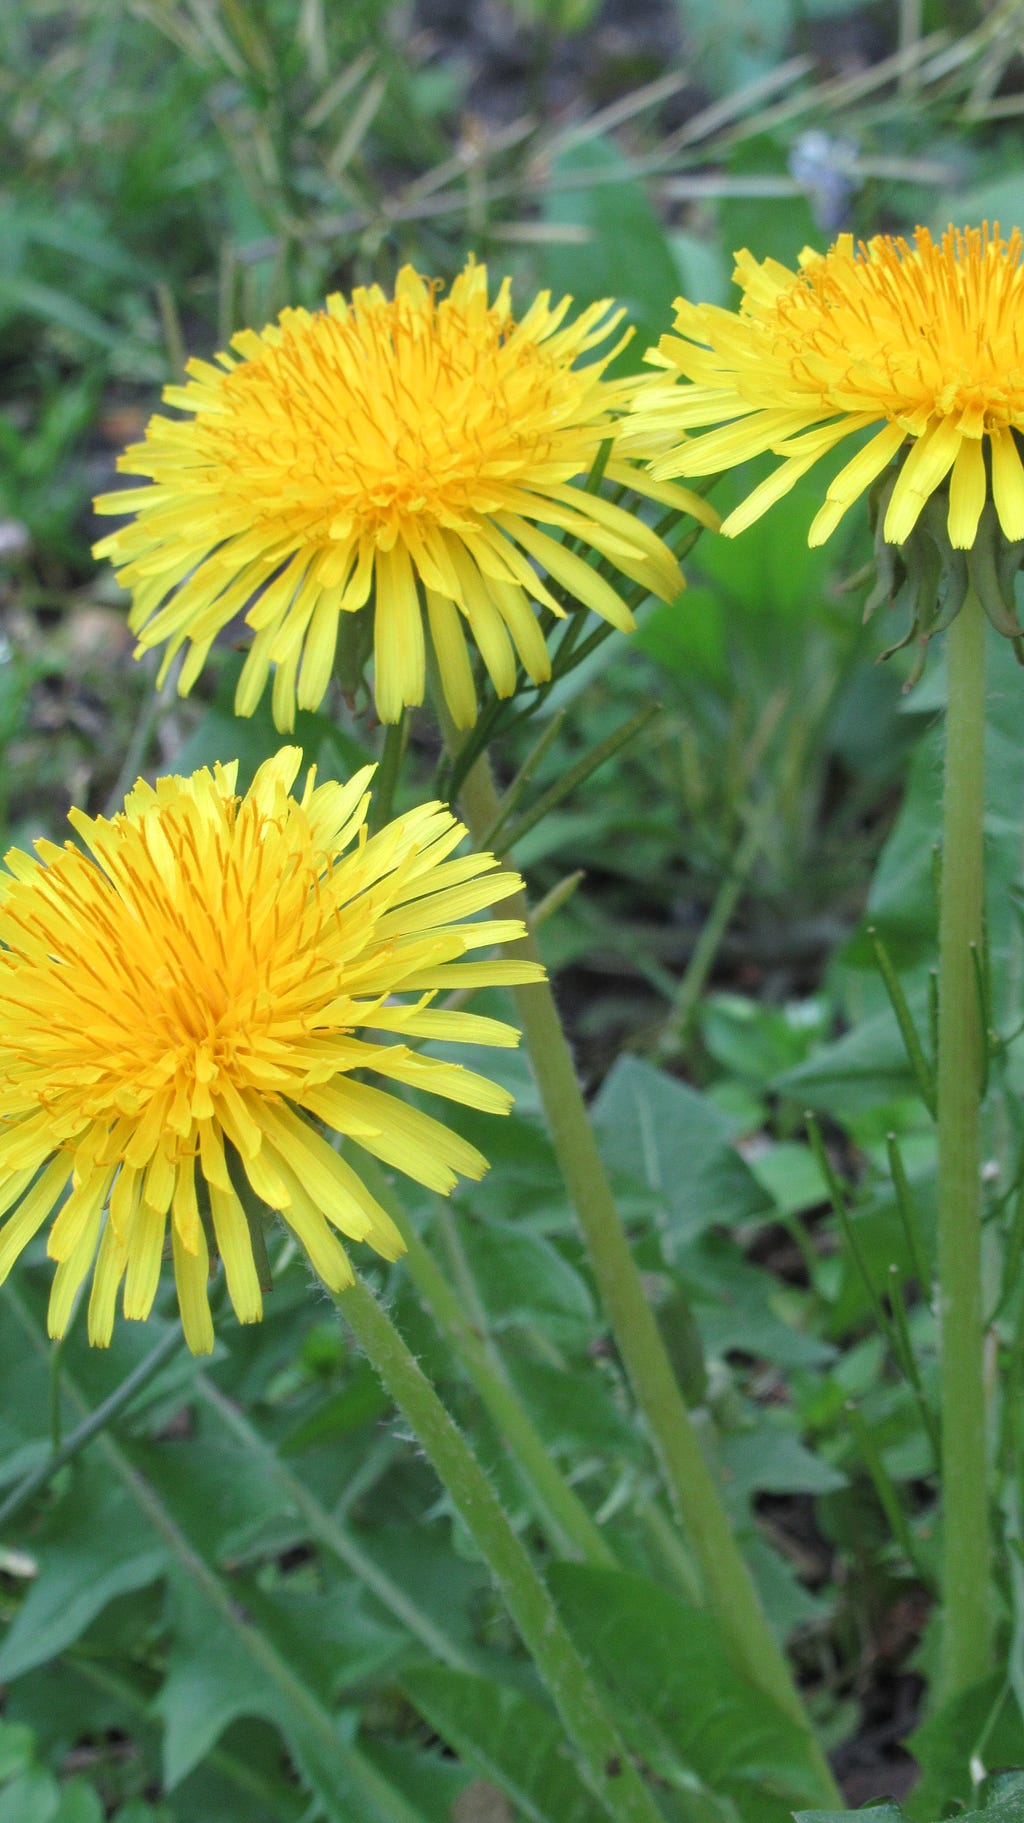 Close up of 3 dandelions from ground level.